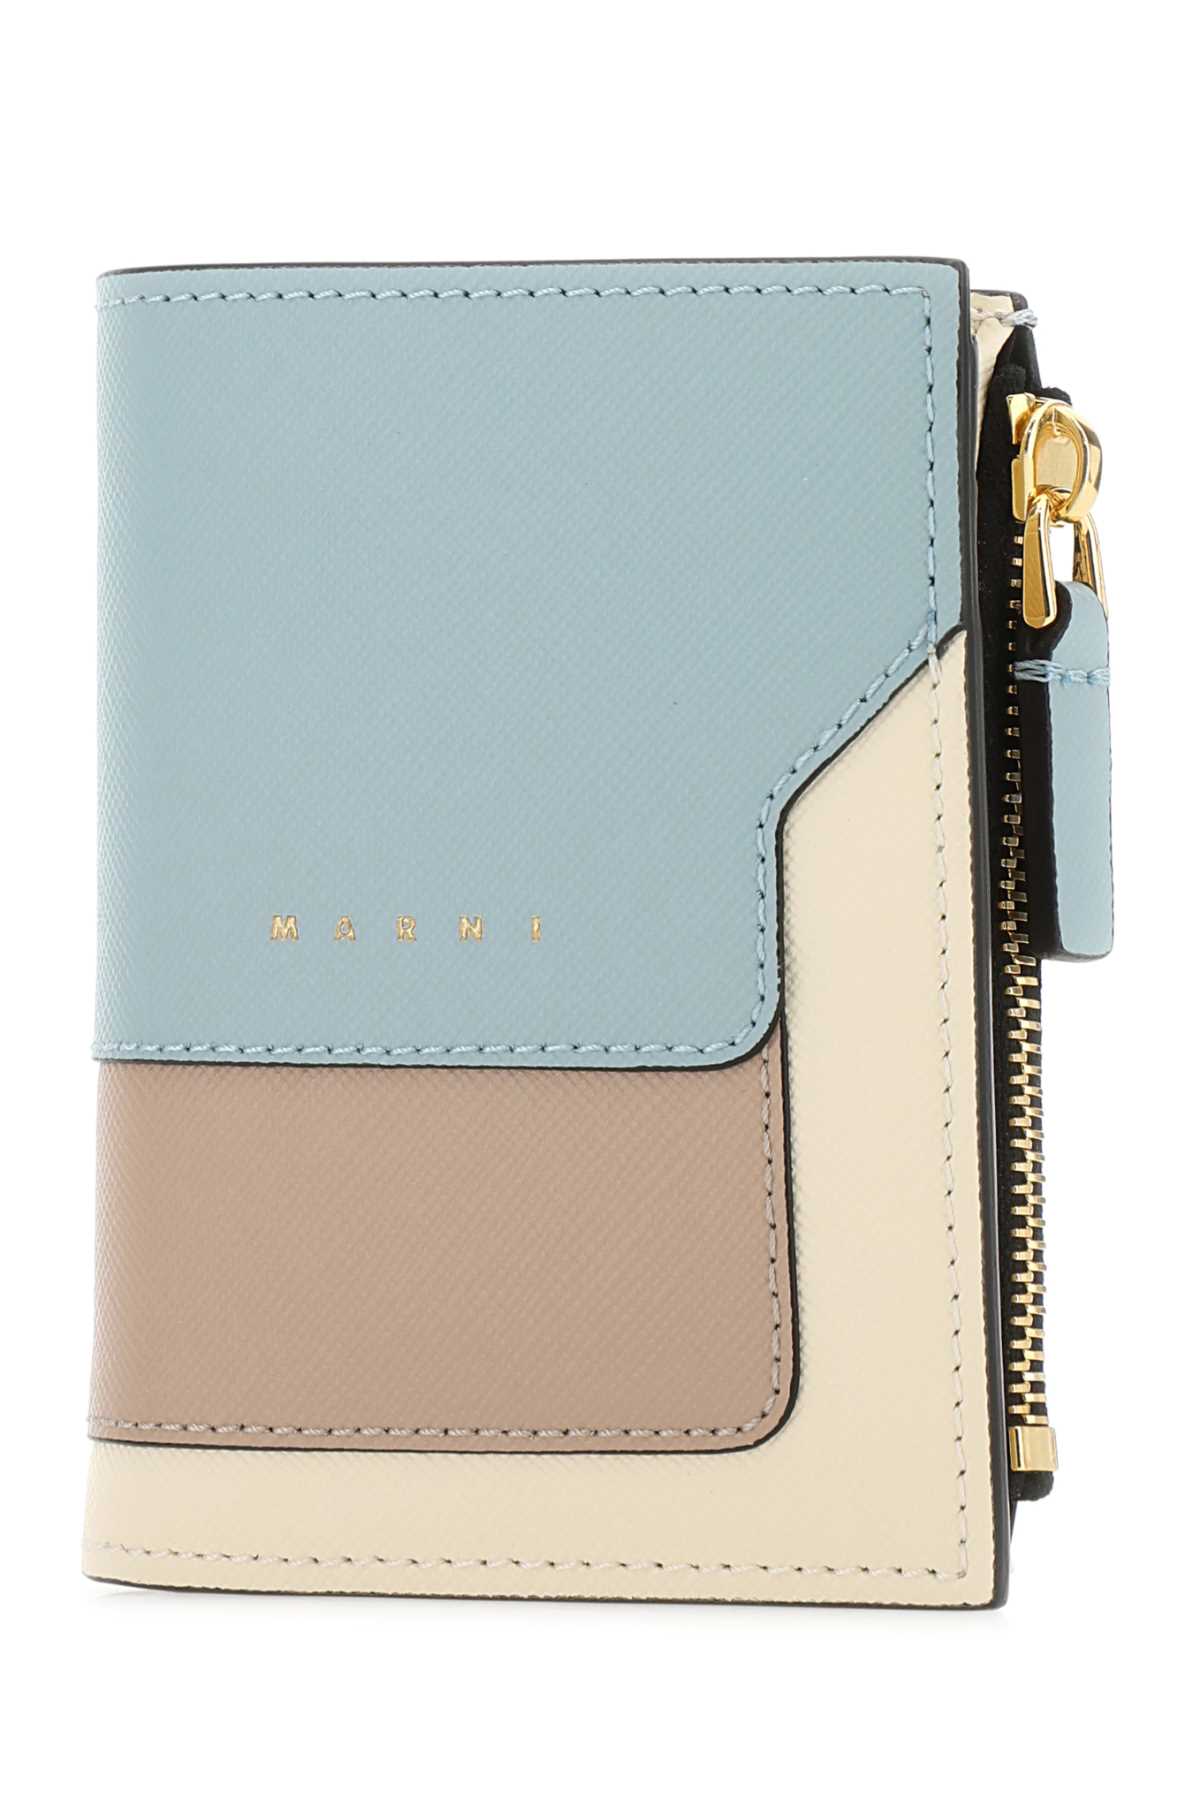 Marni Multicolor Leather Wallet In Z606m